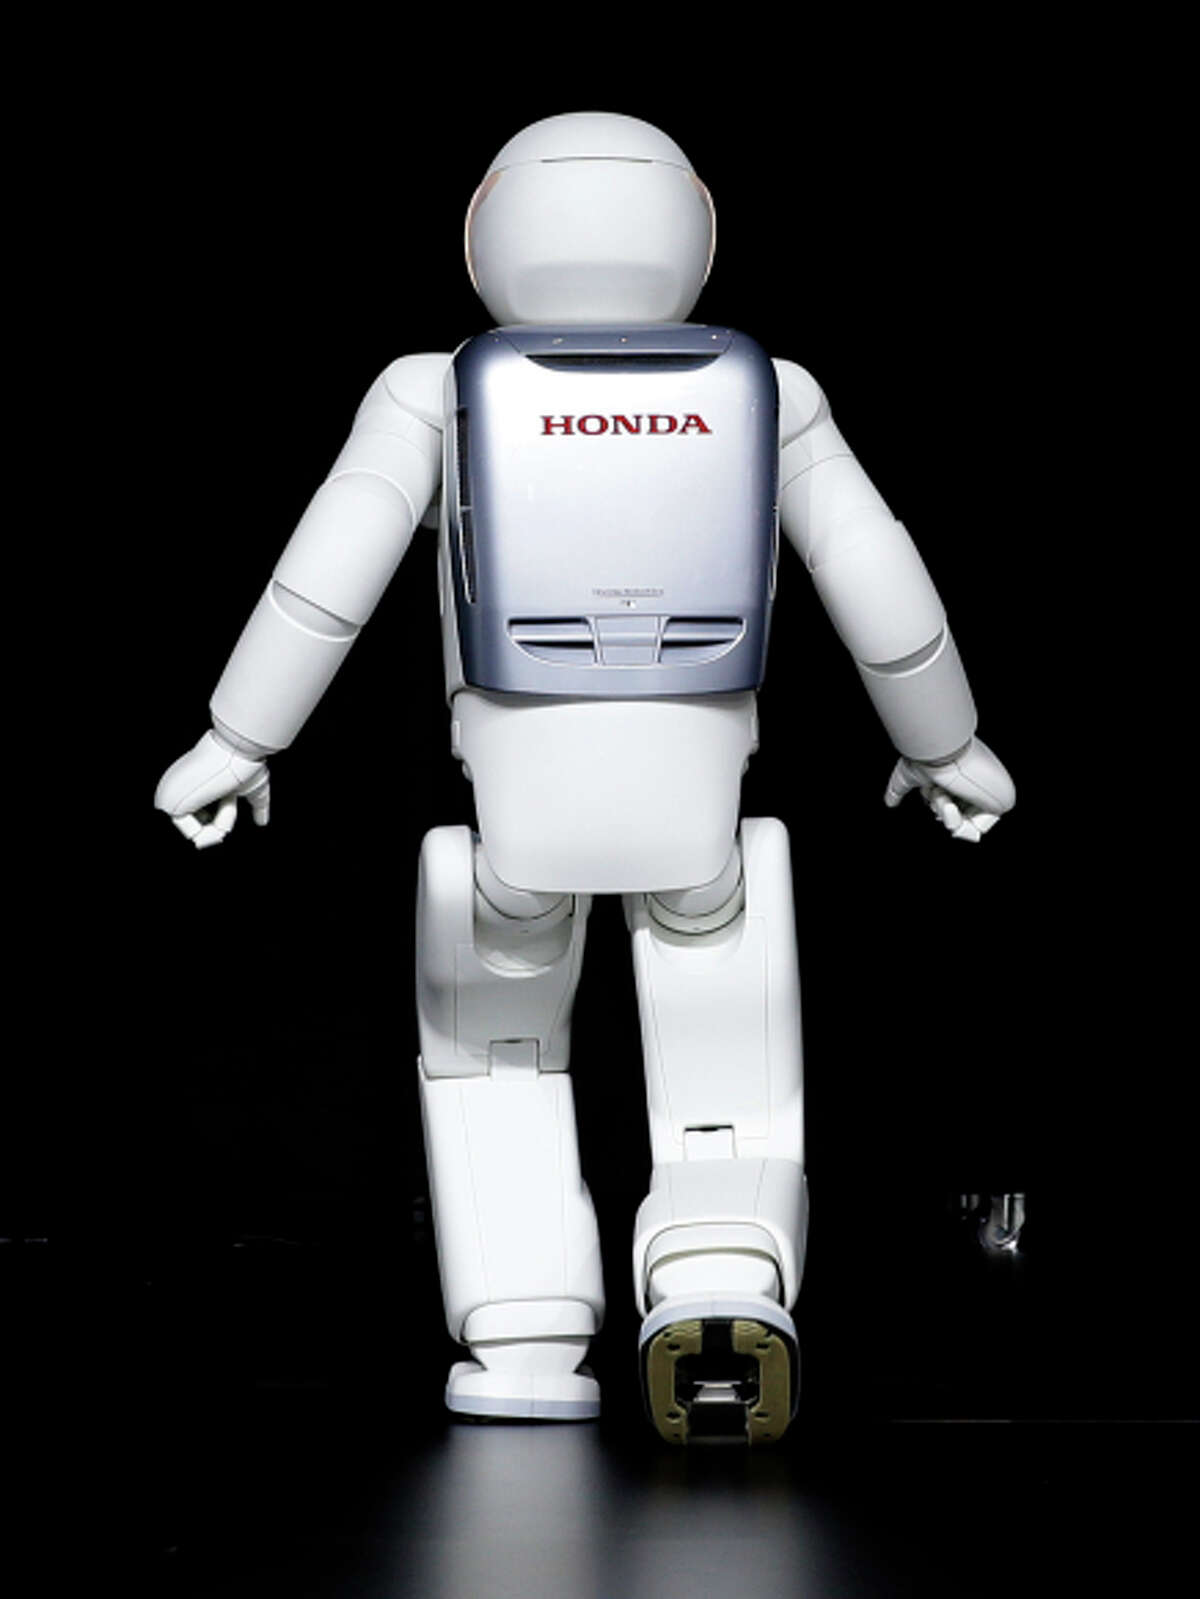 Almost human: Honda’s robot, Asimo, can run forward and backward and hop on one foot. The Asimo Robot walks behind a curtain at the New York International Auto Show in New York, Thursday, April 17, 2014. (AP Photo/Seth Wenig)